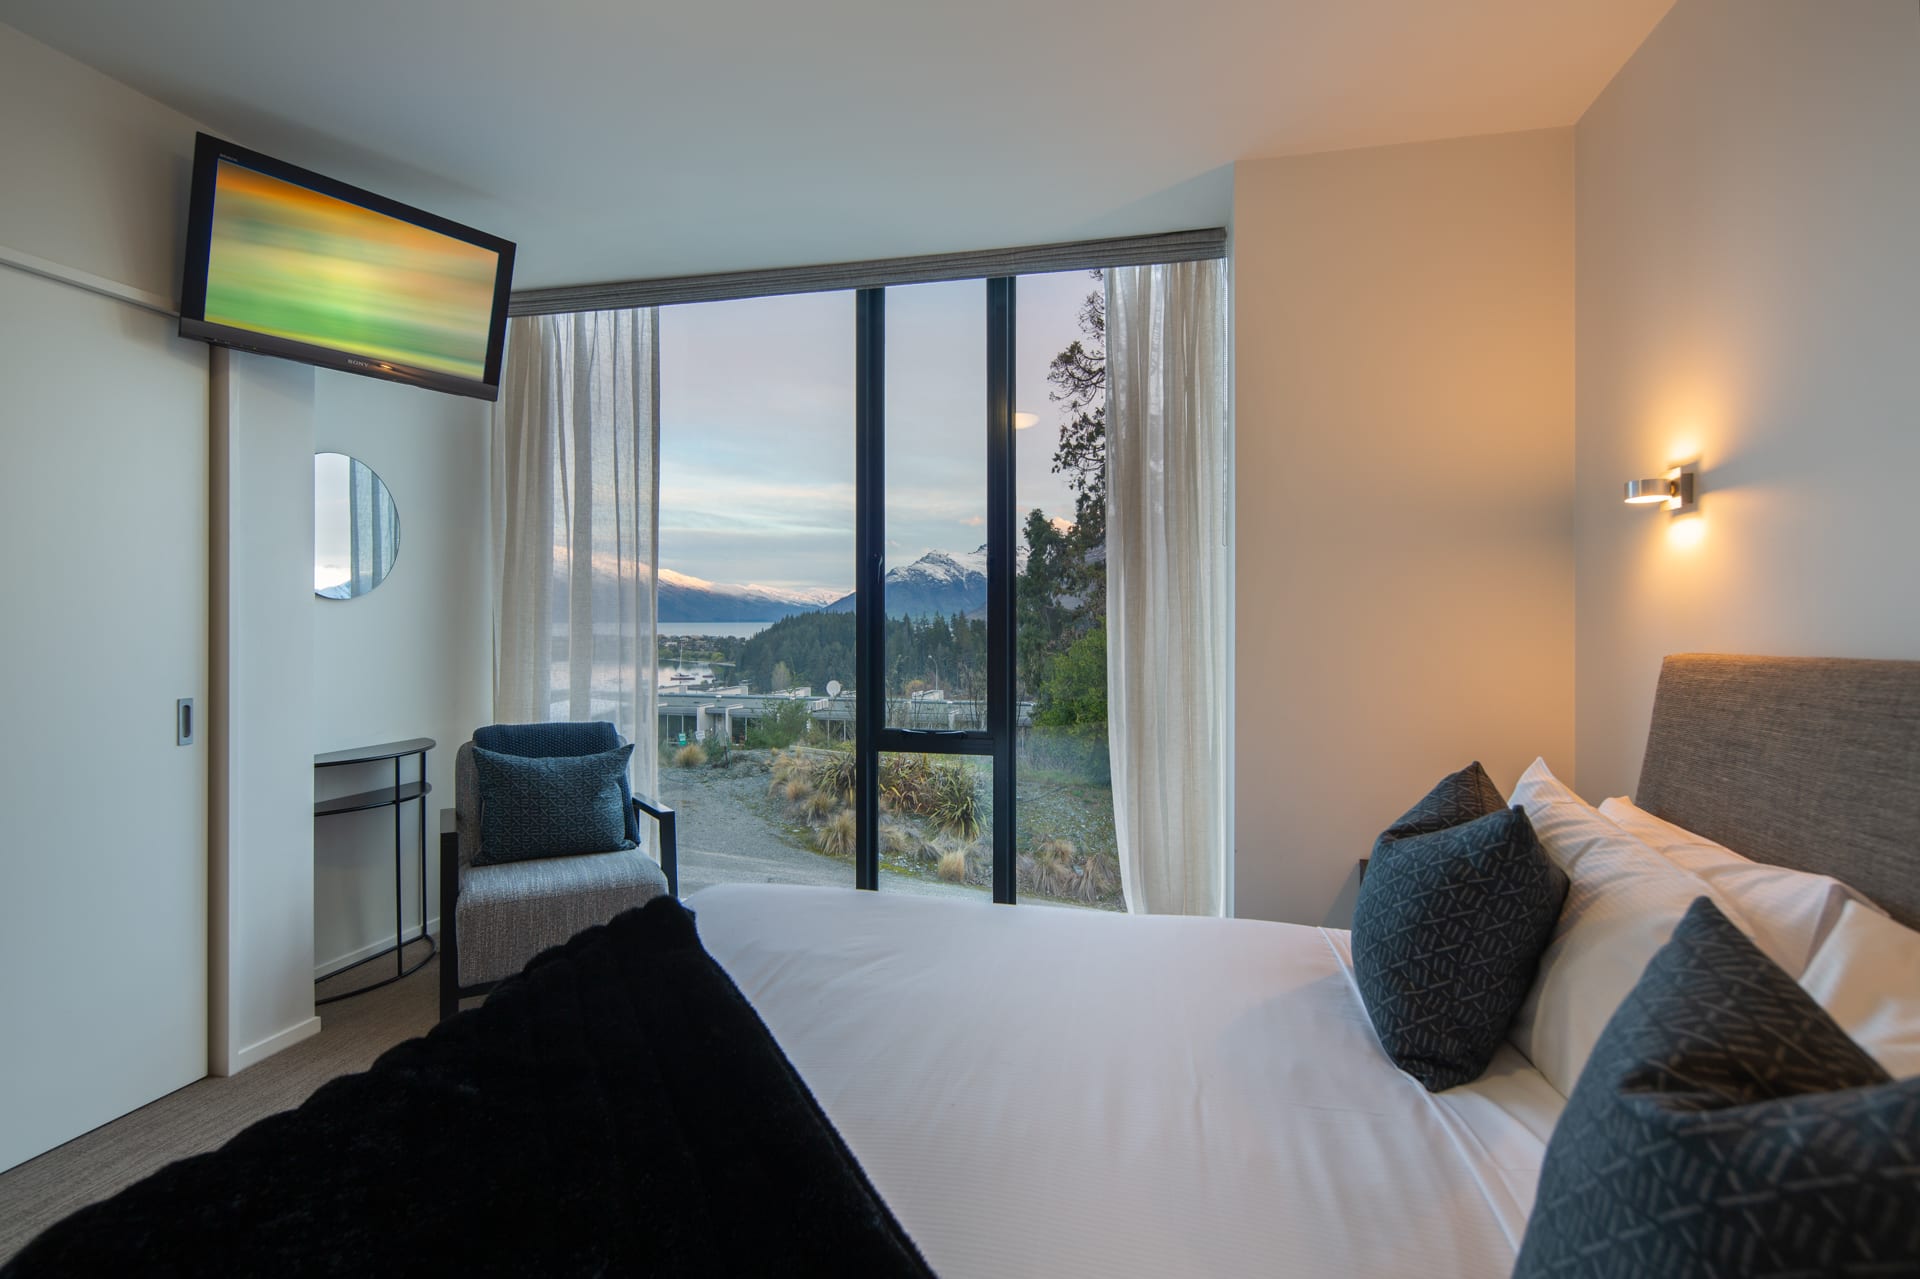 Bedroom 1 with scenic views